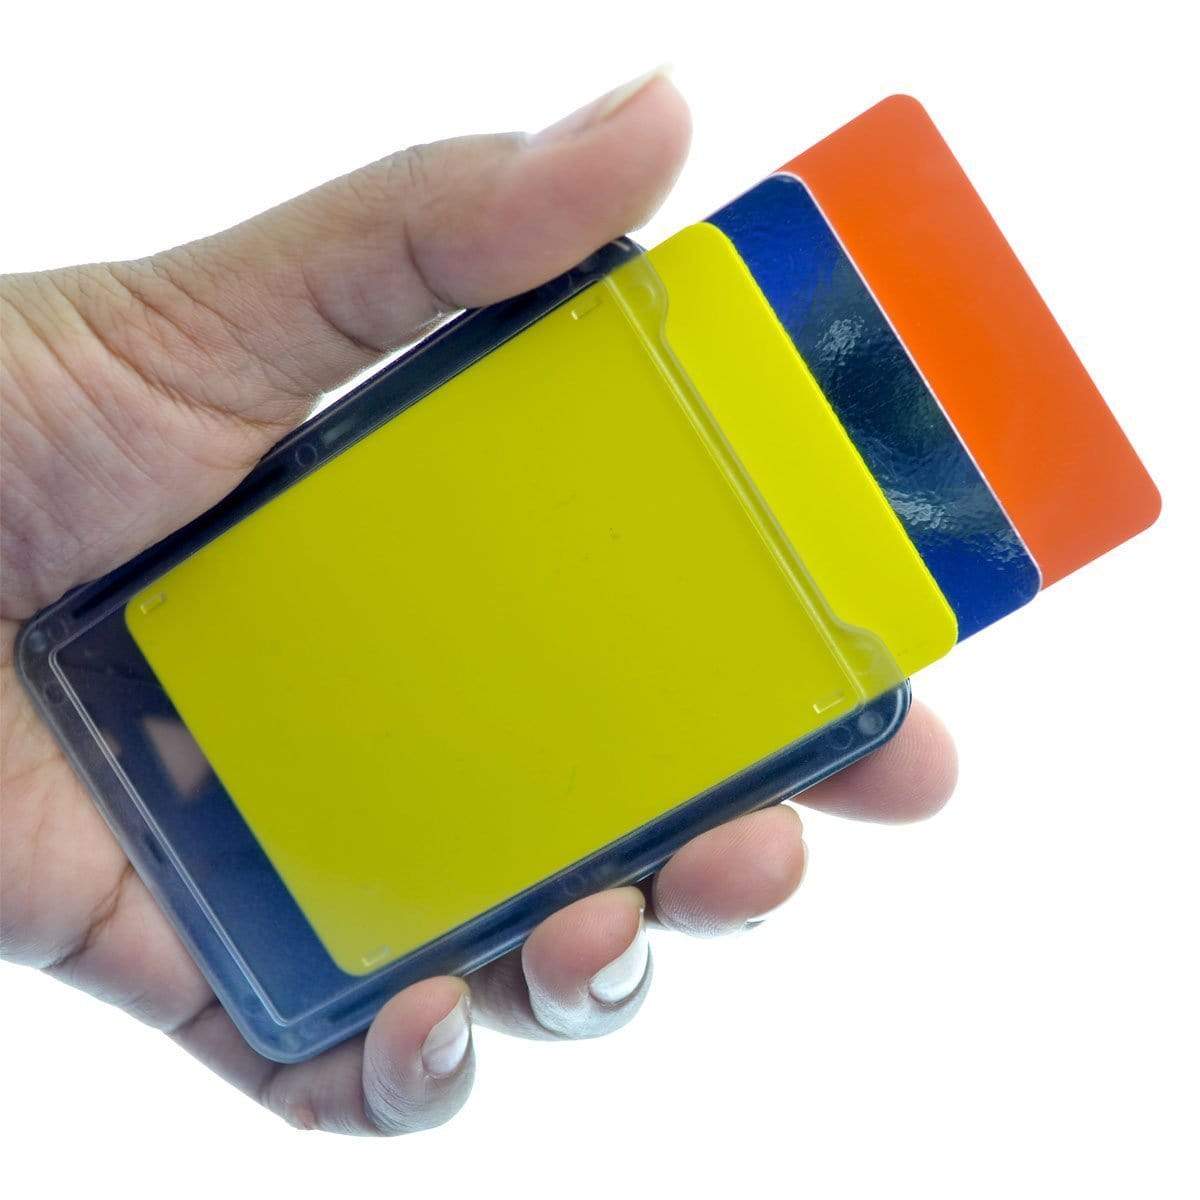 A hand holding a Top Loading THREE ID Card Badge Holder with Heavy Duty Lanyard w/ Detachable Metal Clip and Key Ring by Specialist ID, including yellow, blue, and red cards, partially slided apart.